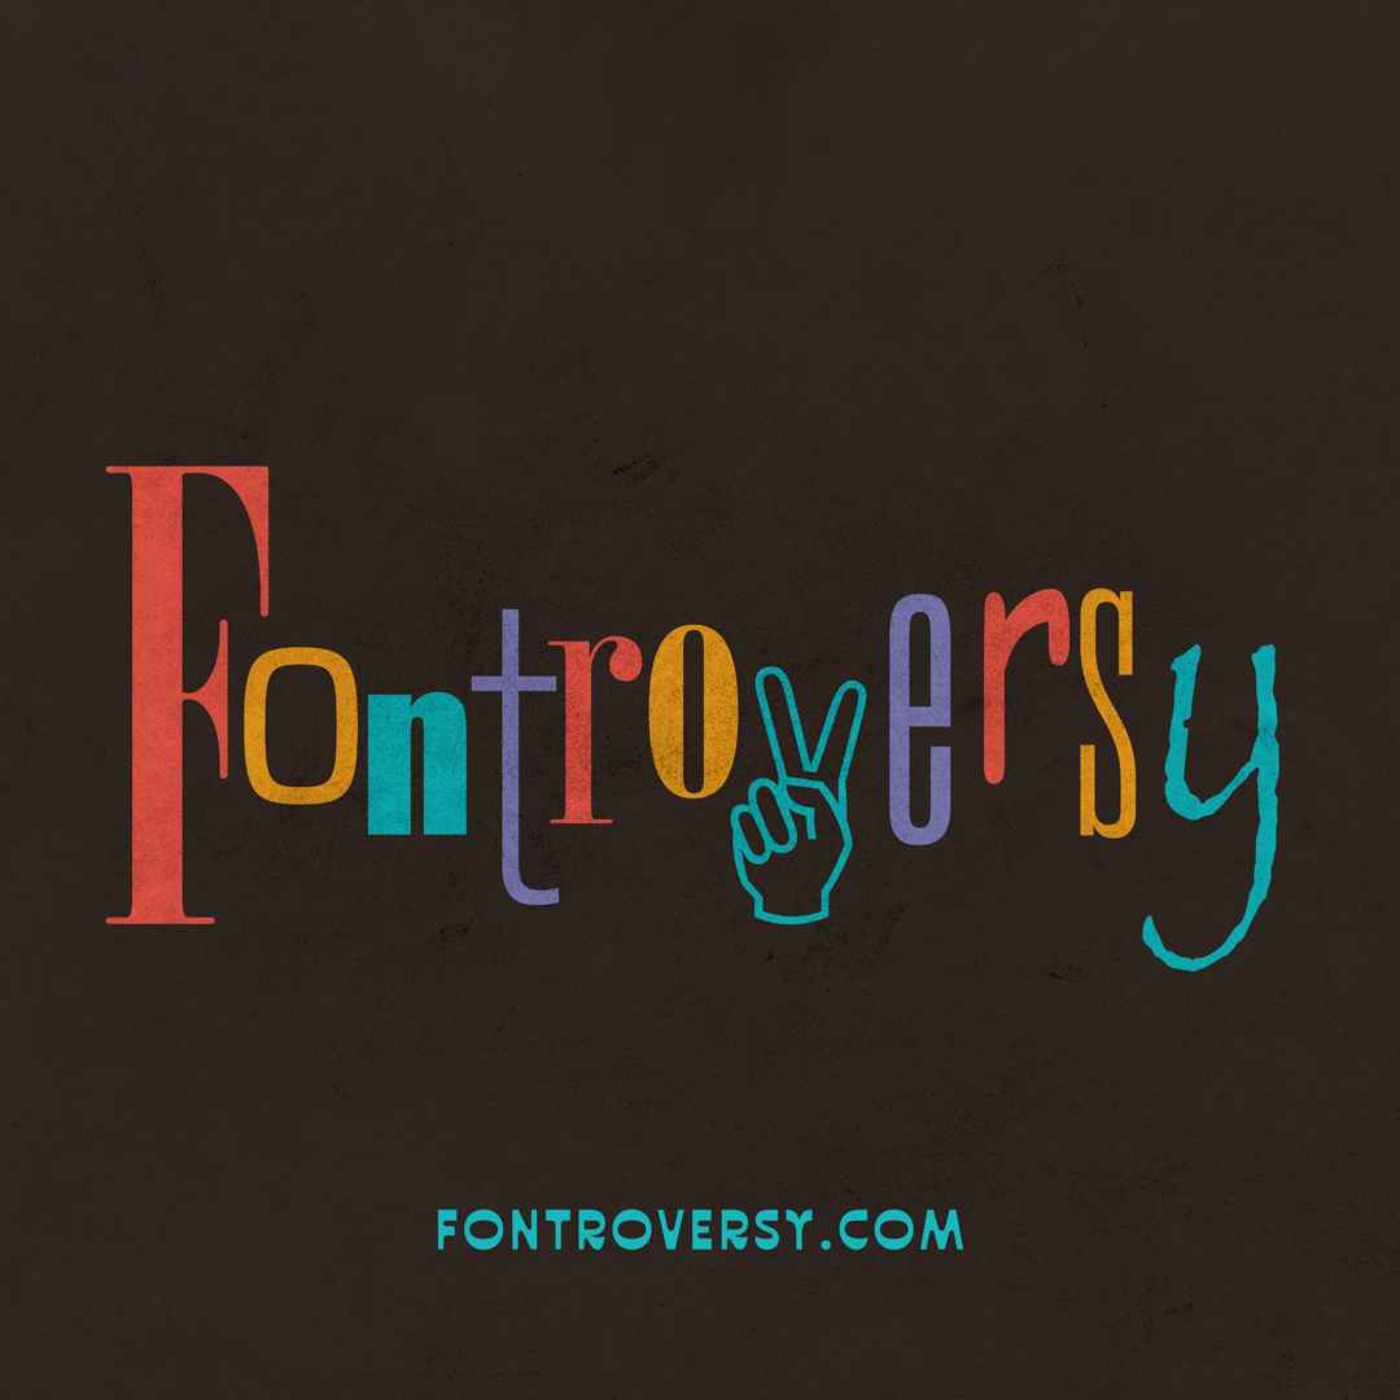 Introducing Fontroversy, a new limited-run series coming July 20!